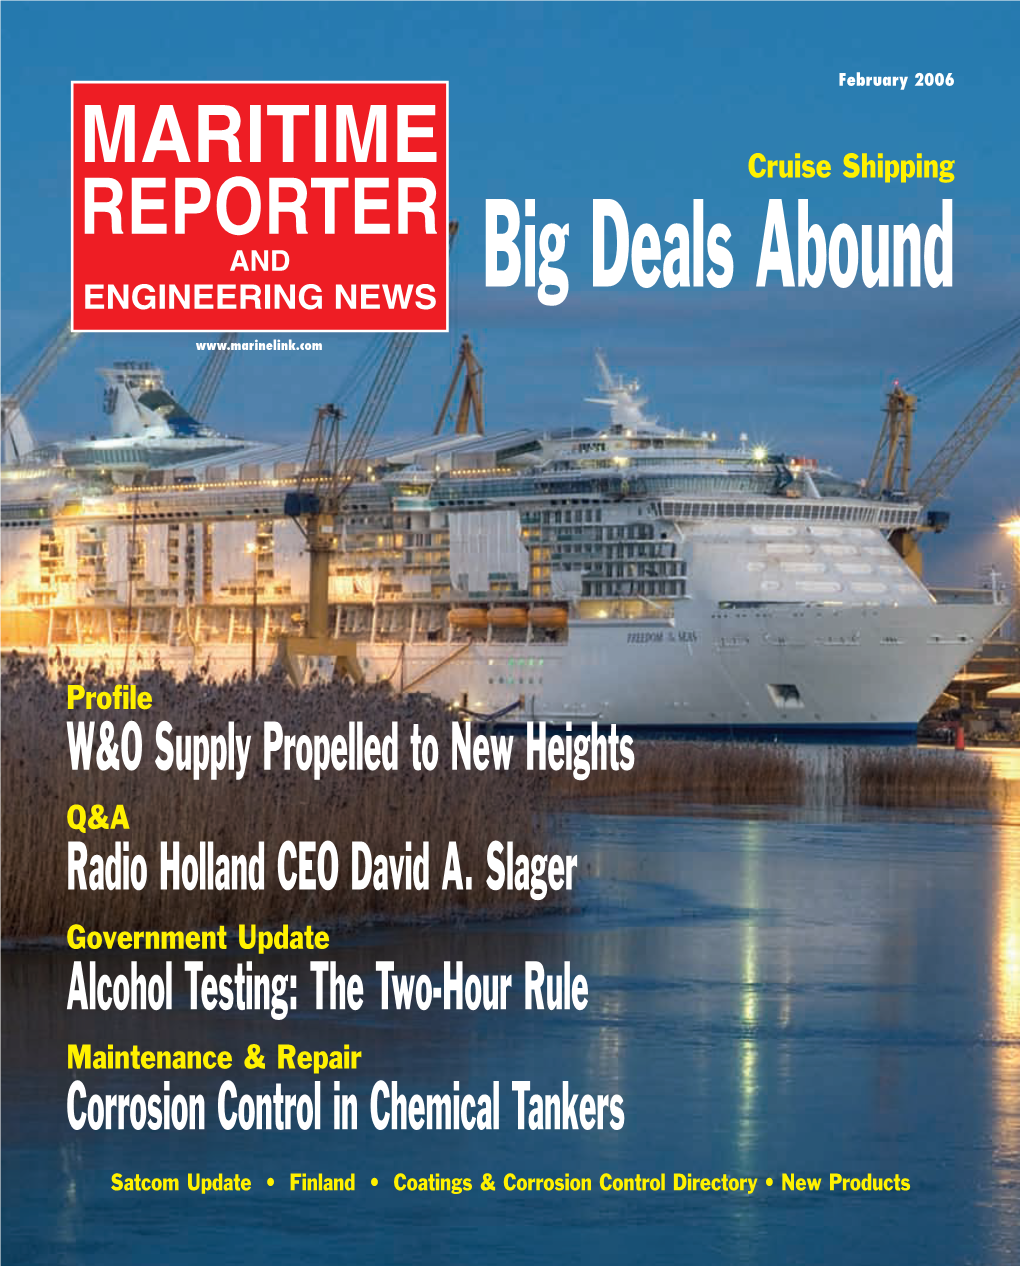 Maritime Reporter & Engineering News MR FEBRUARY2006 #1 (1-8).Qxd 2/1/2006 7:10 PM Page 7